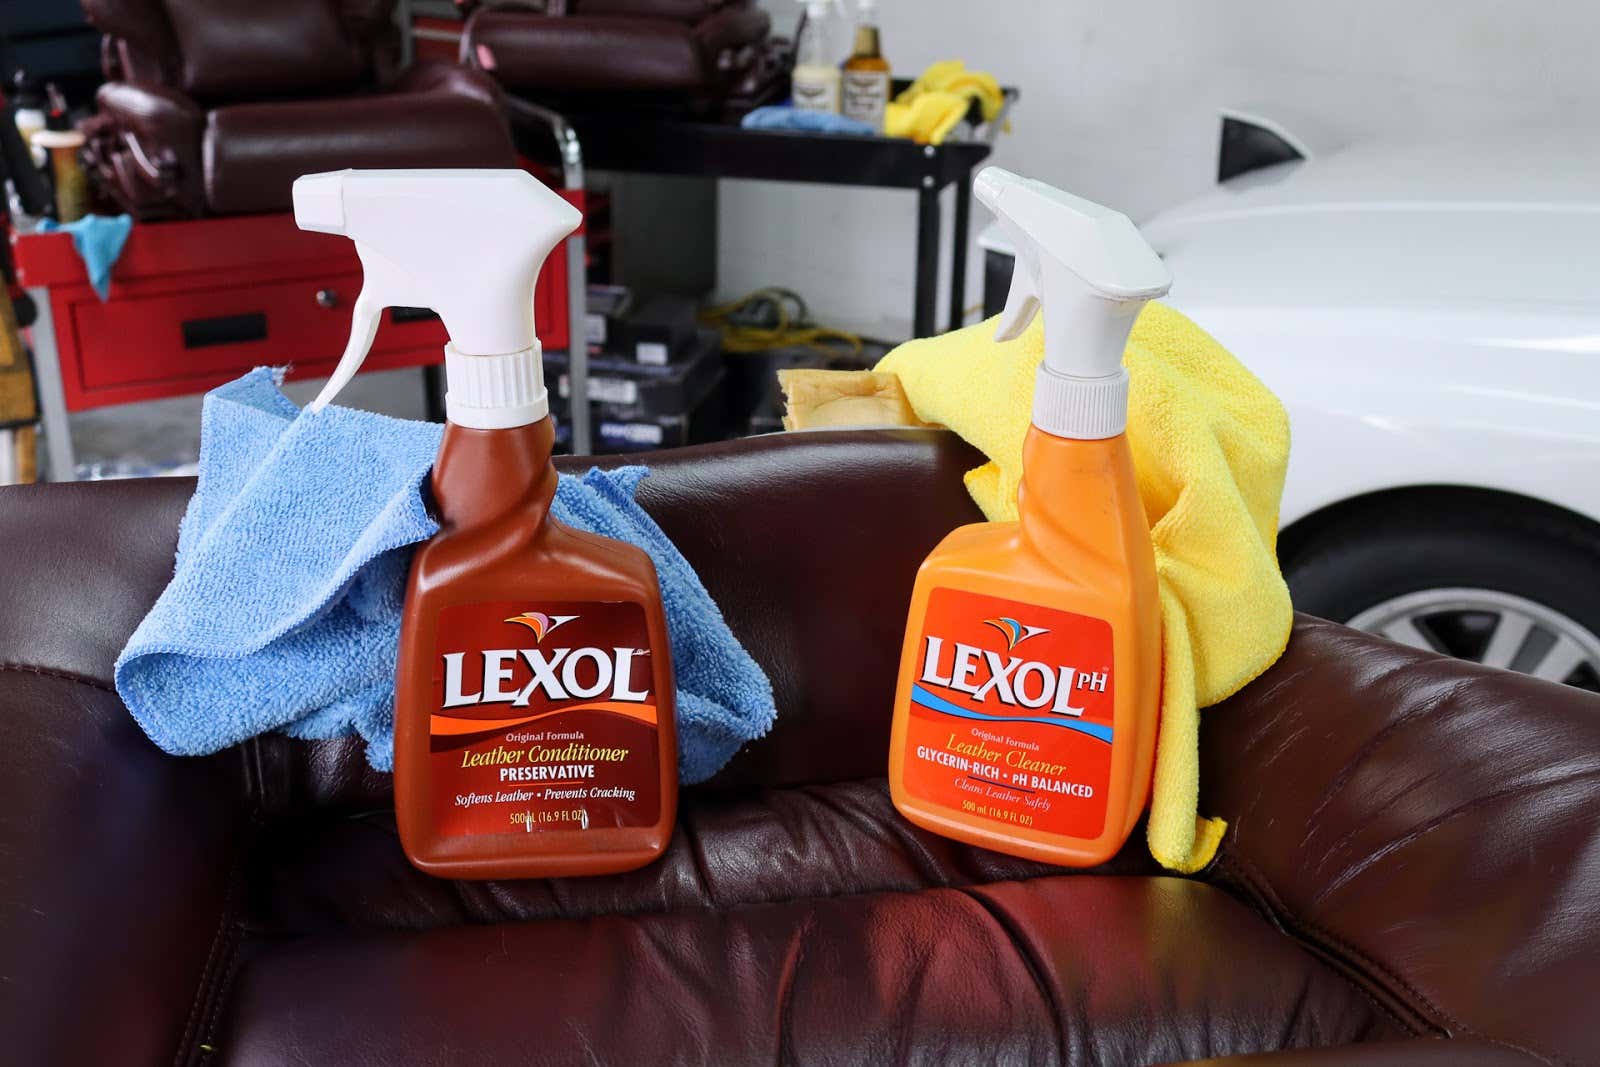 Lexol Leather Cleaner and Conditioner